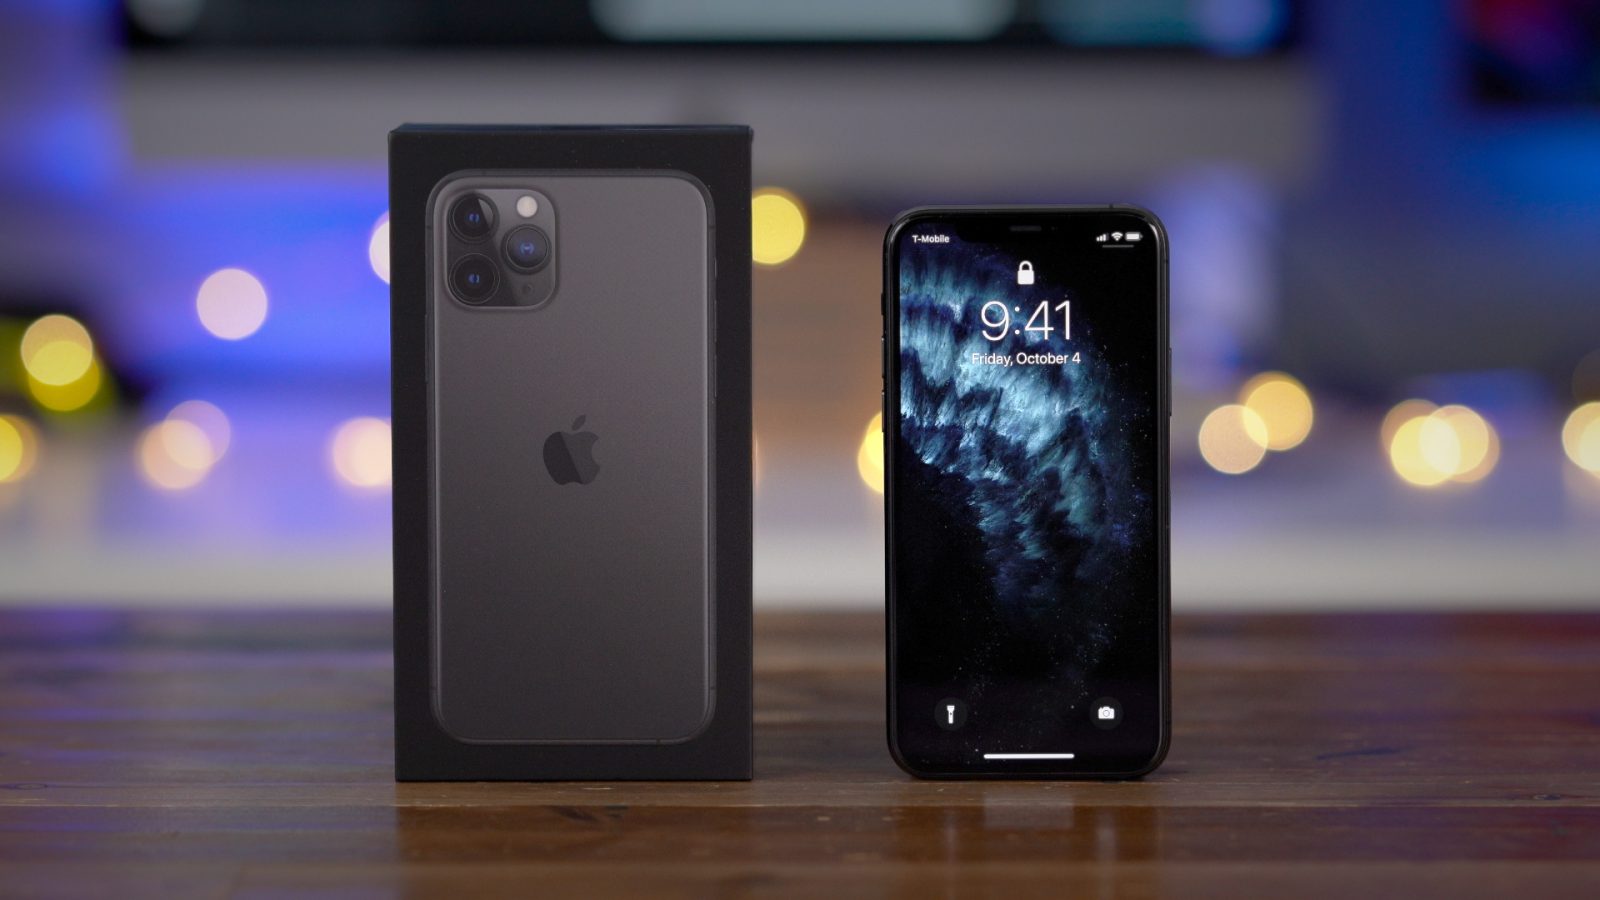 Top Iphone 11 Pro Features Built For Photo And Video Enthusiasts